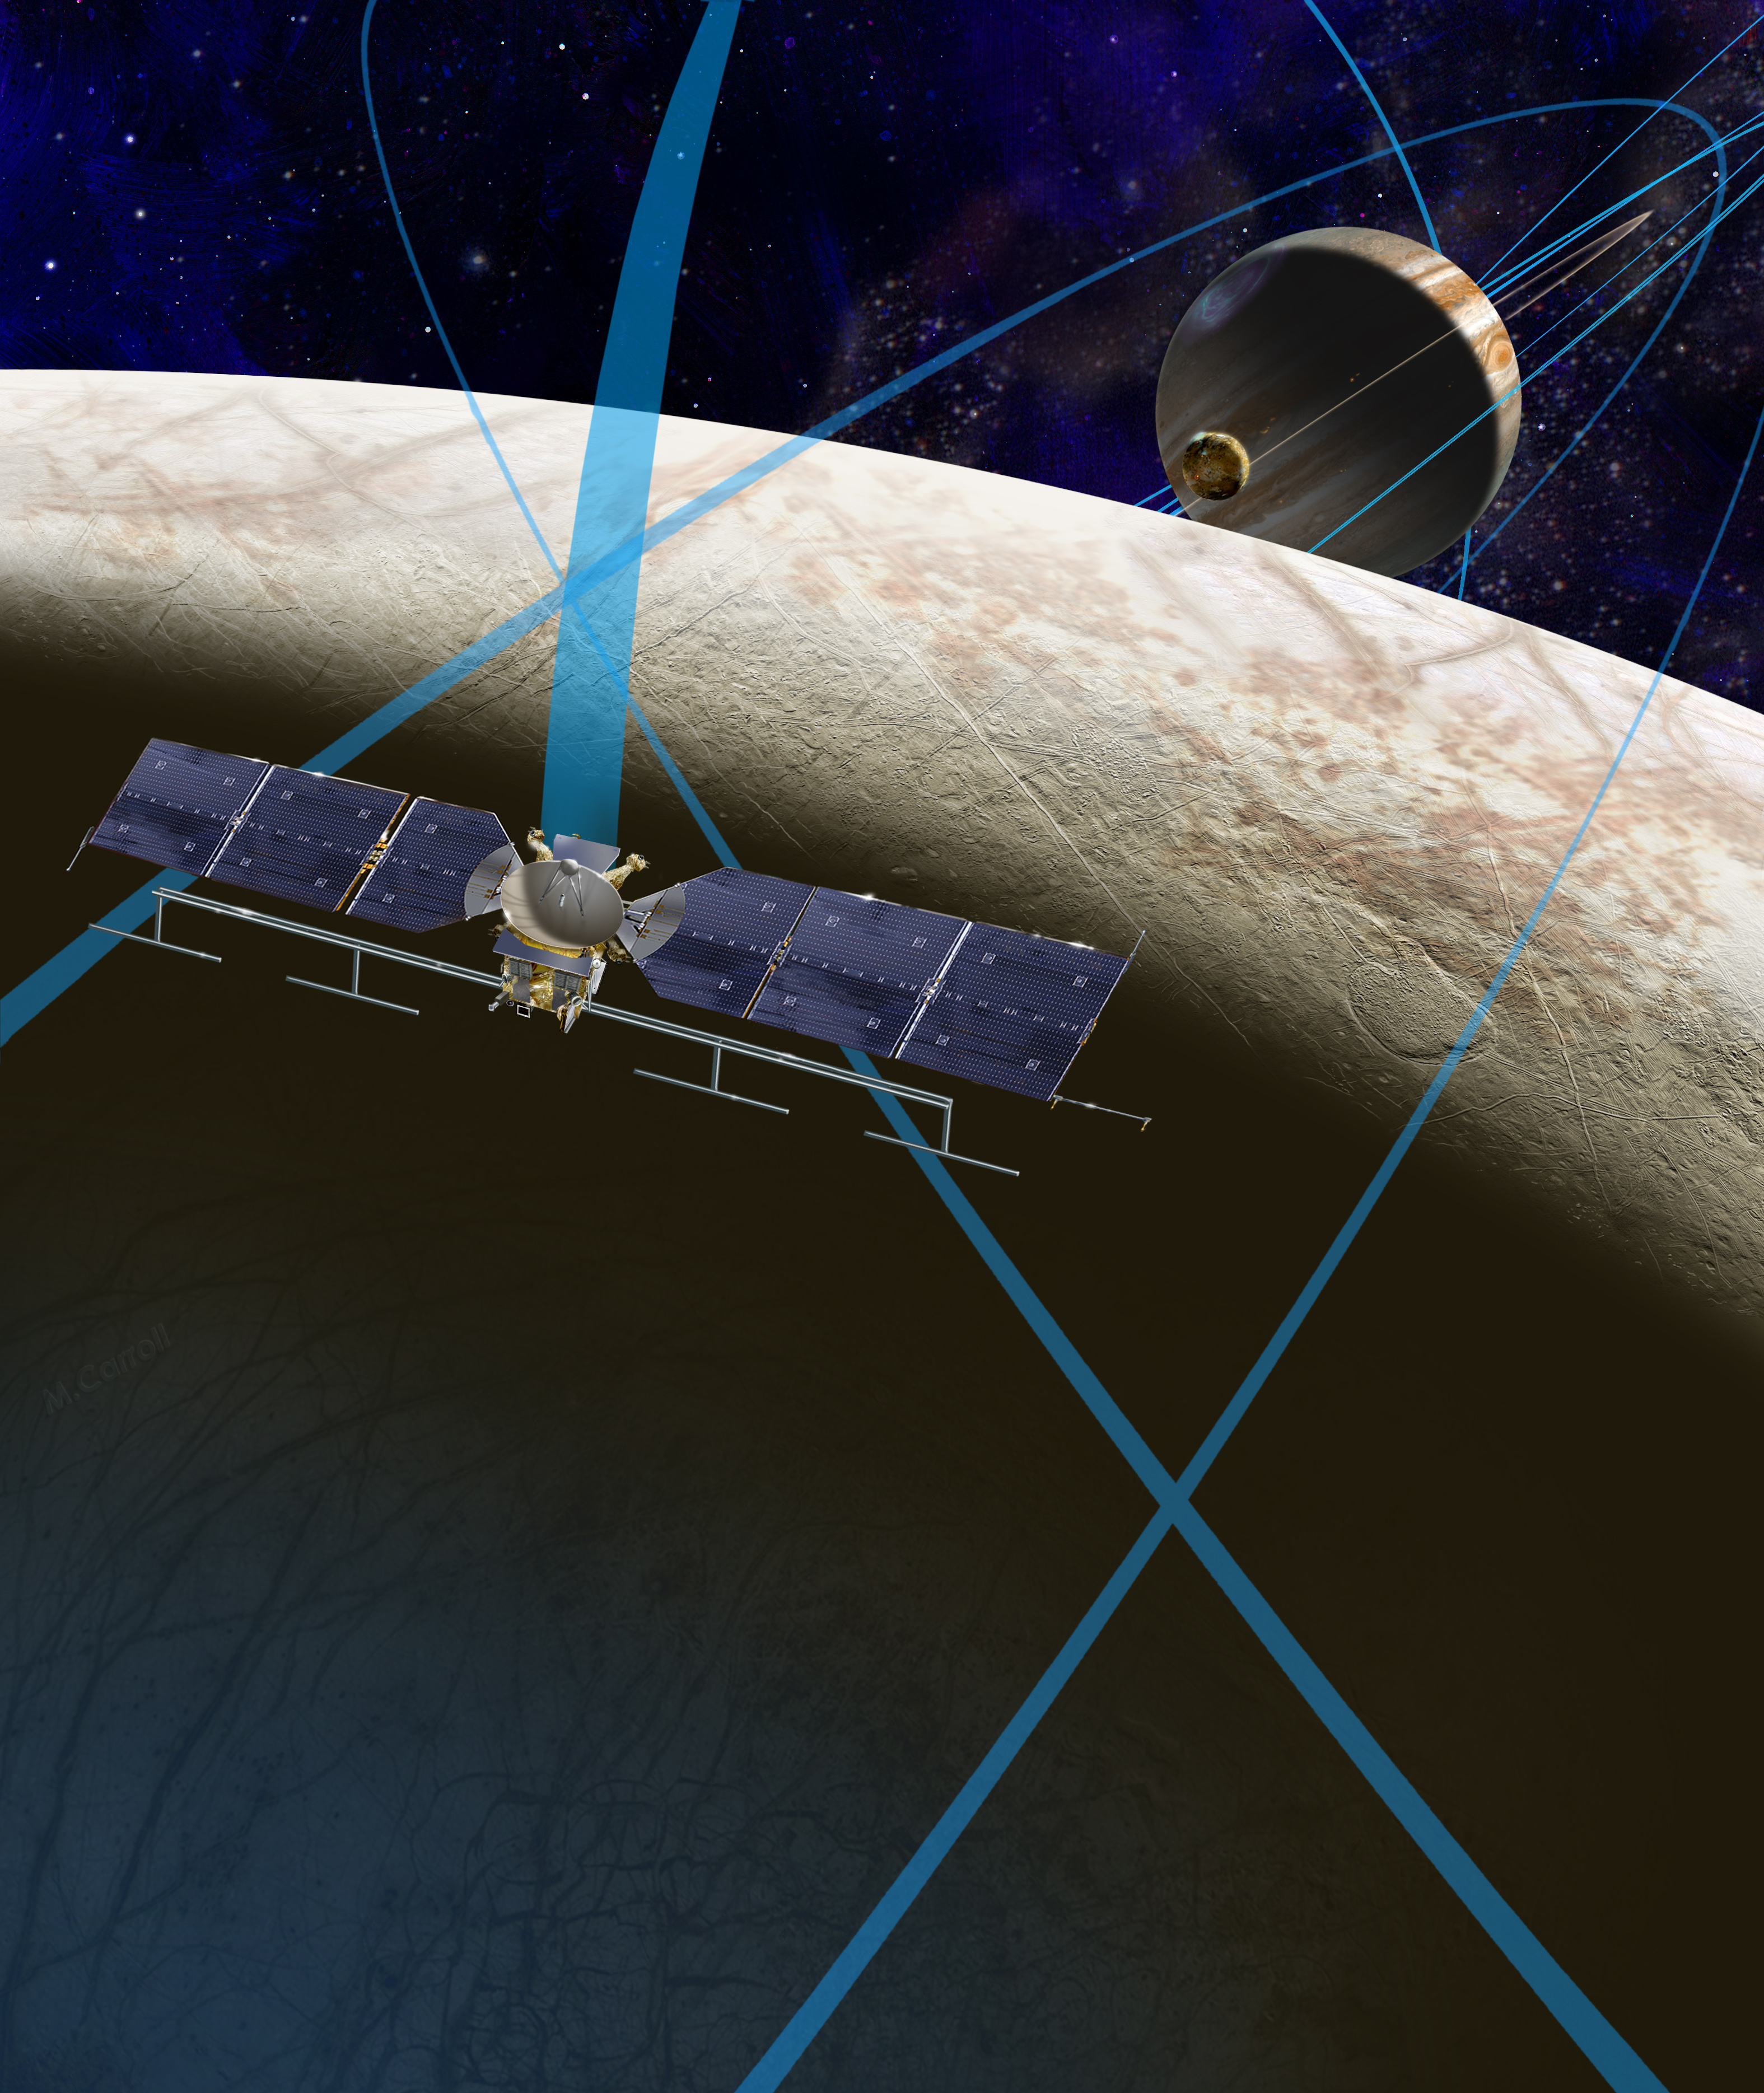 This artist's rendering shows a concept for a future NASA mission to Europa in which a spacecraft would make multiple close flybys of the icy Jovian moon, thought to contain a global subsurface ocean.Credits: NASA/JPL-Caltech